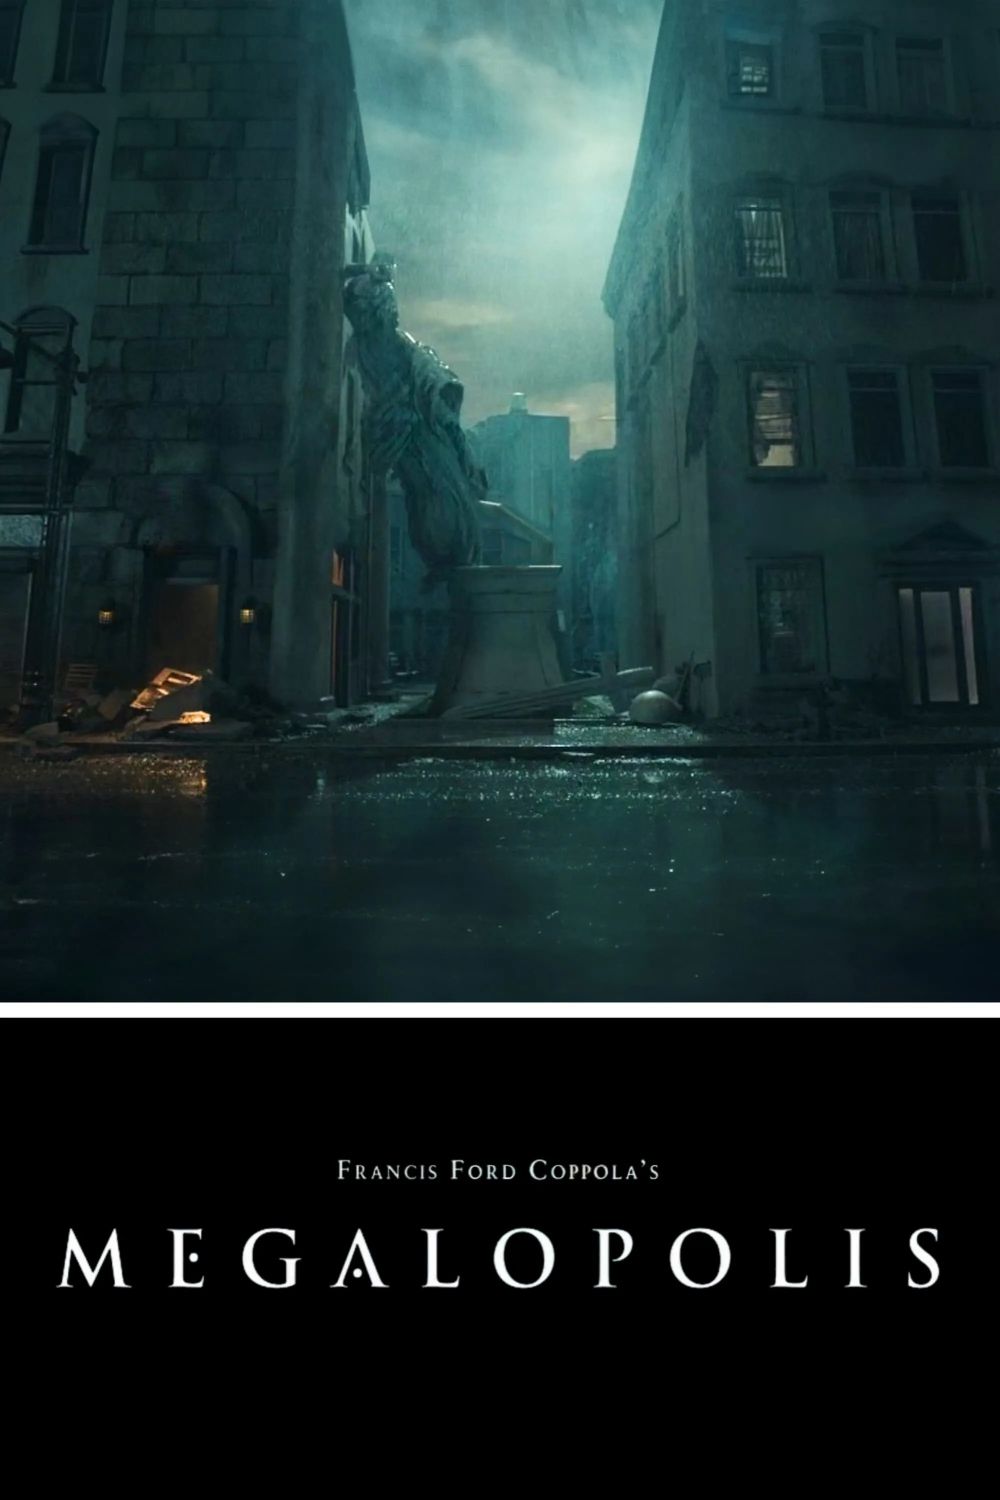 Megalopolis movie from Francis Ford Coppola